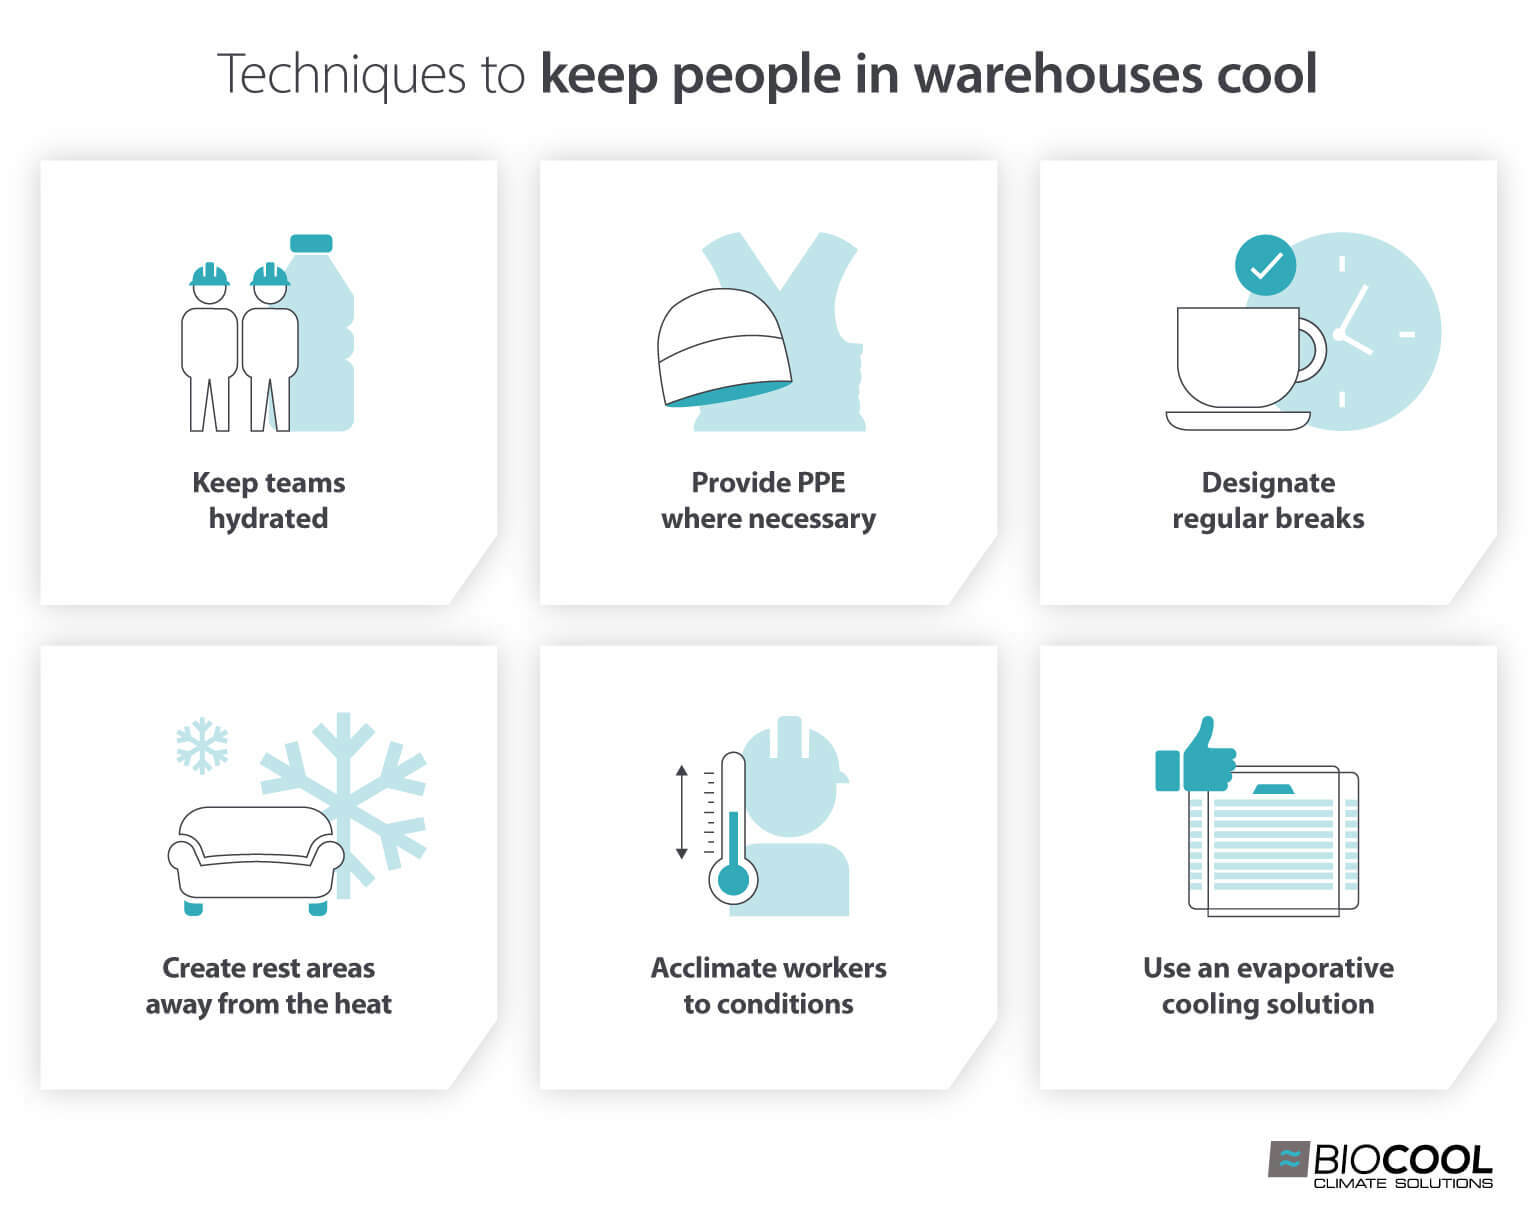 Warehouse cooling techniques to protect employees from heat stress - Image infographic